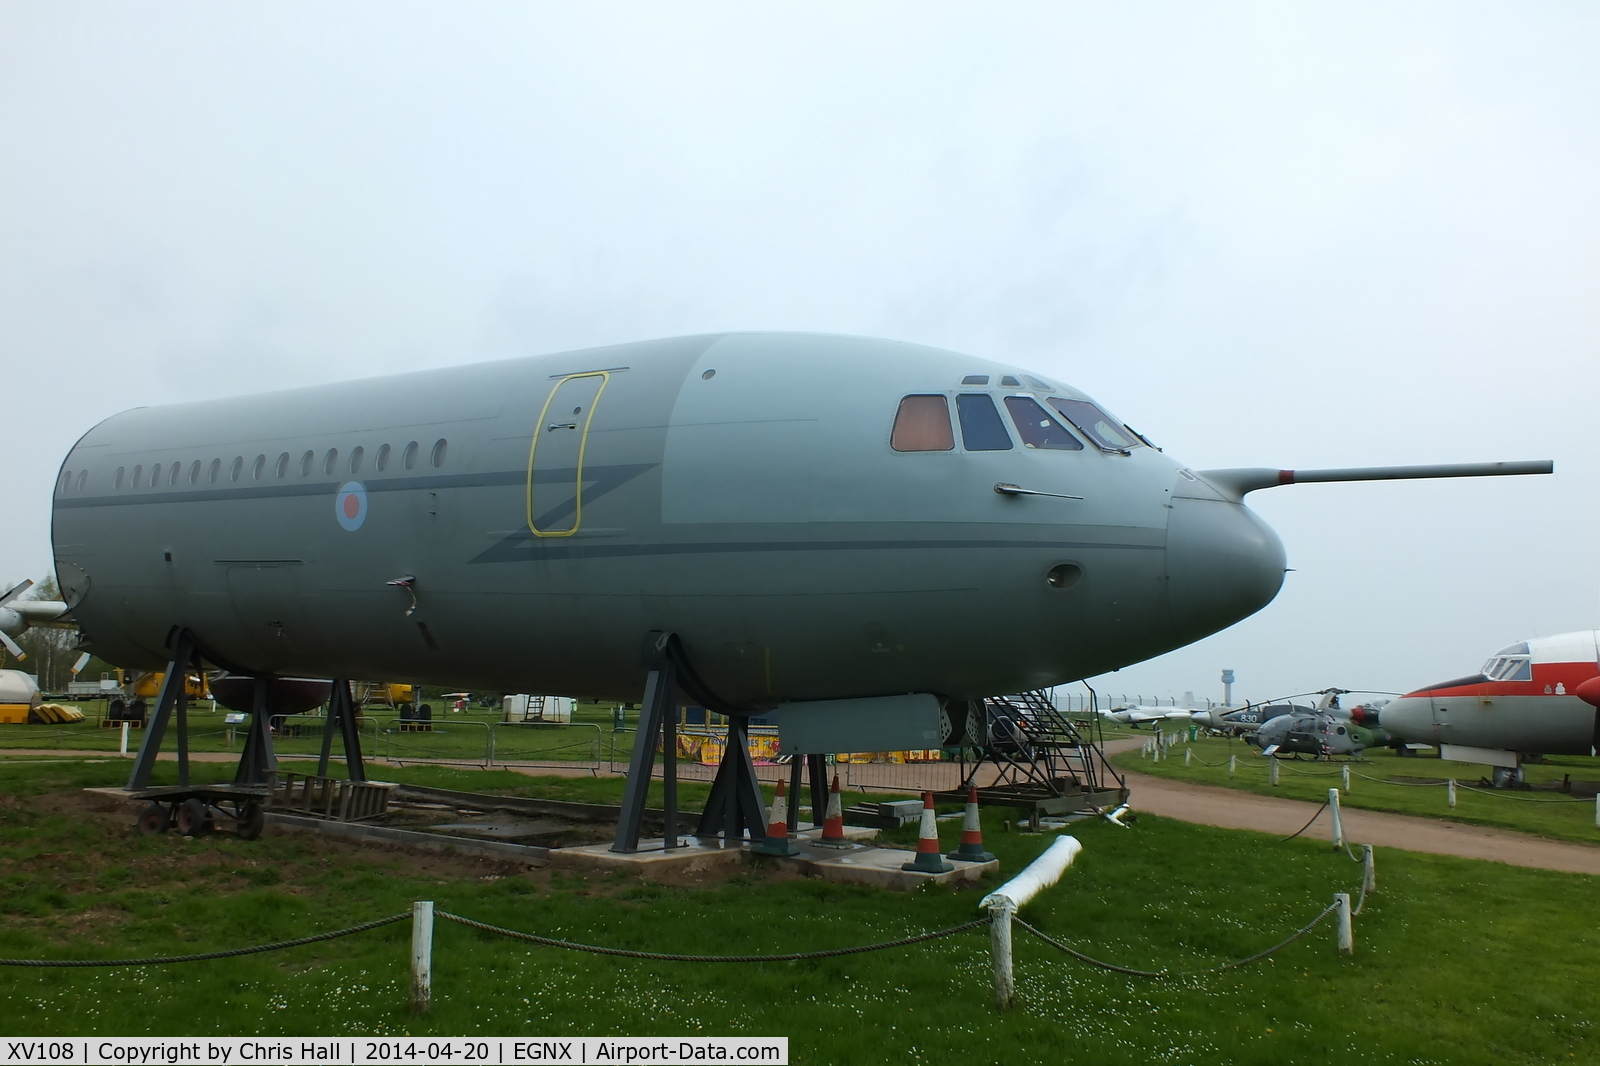 XV108, 1968 Vickers VC10 C.1K C/N 838, latest addition at the East Midlands Aeropark